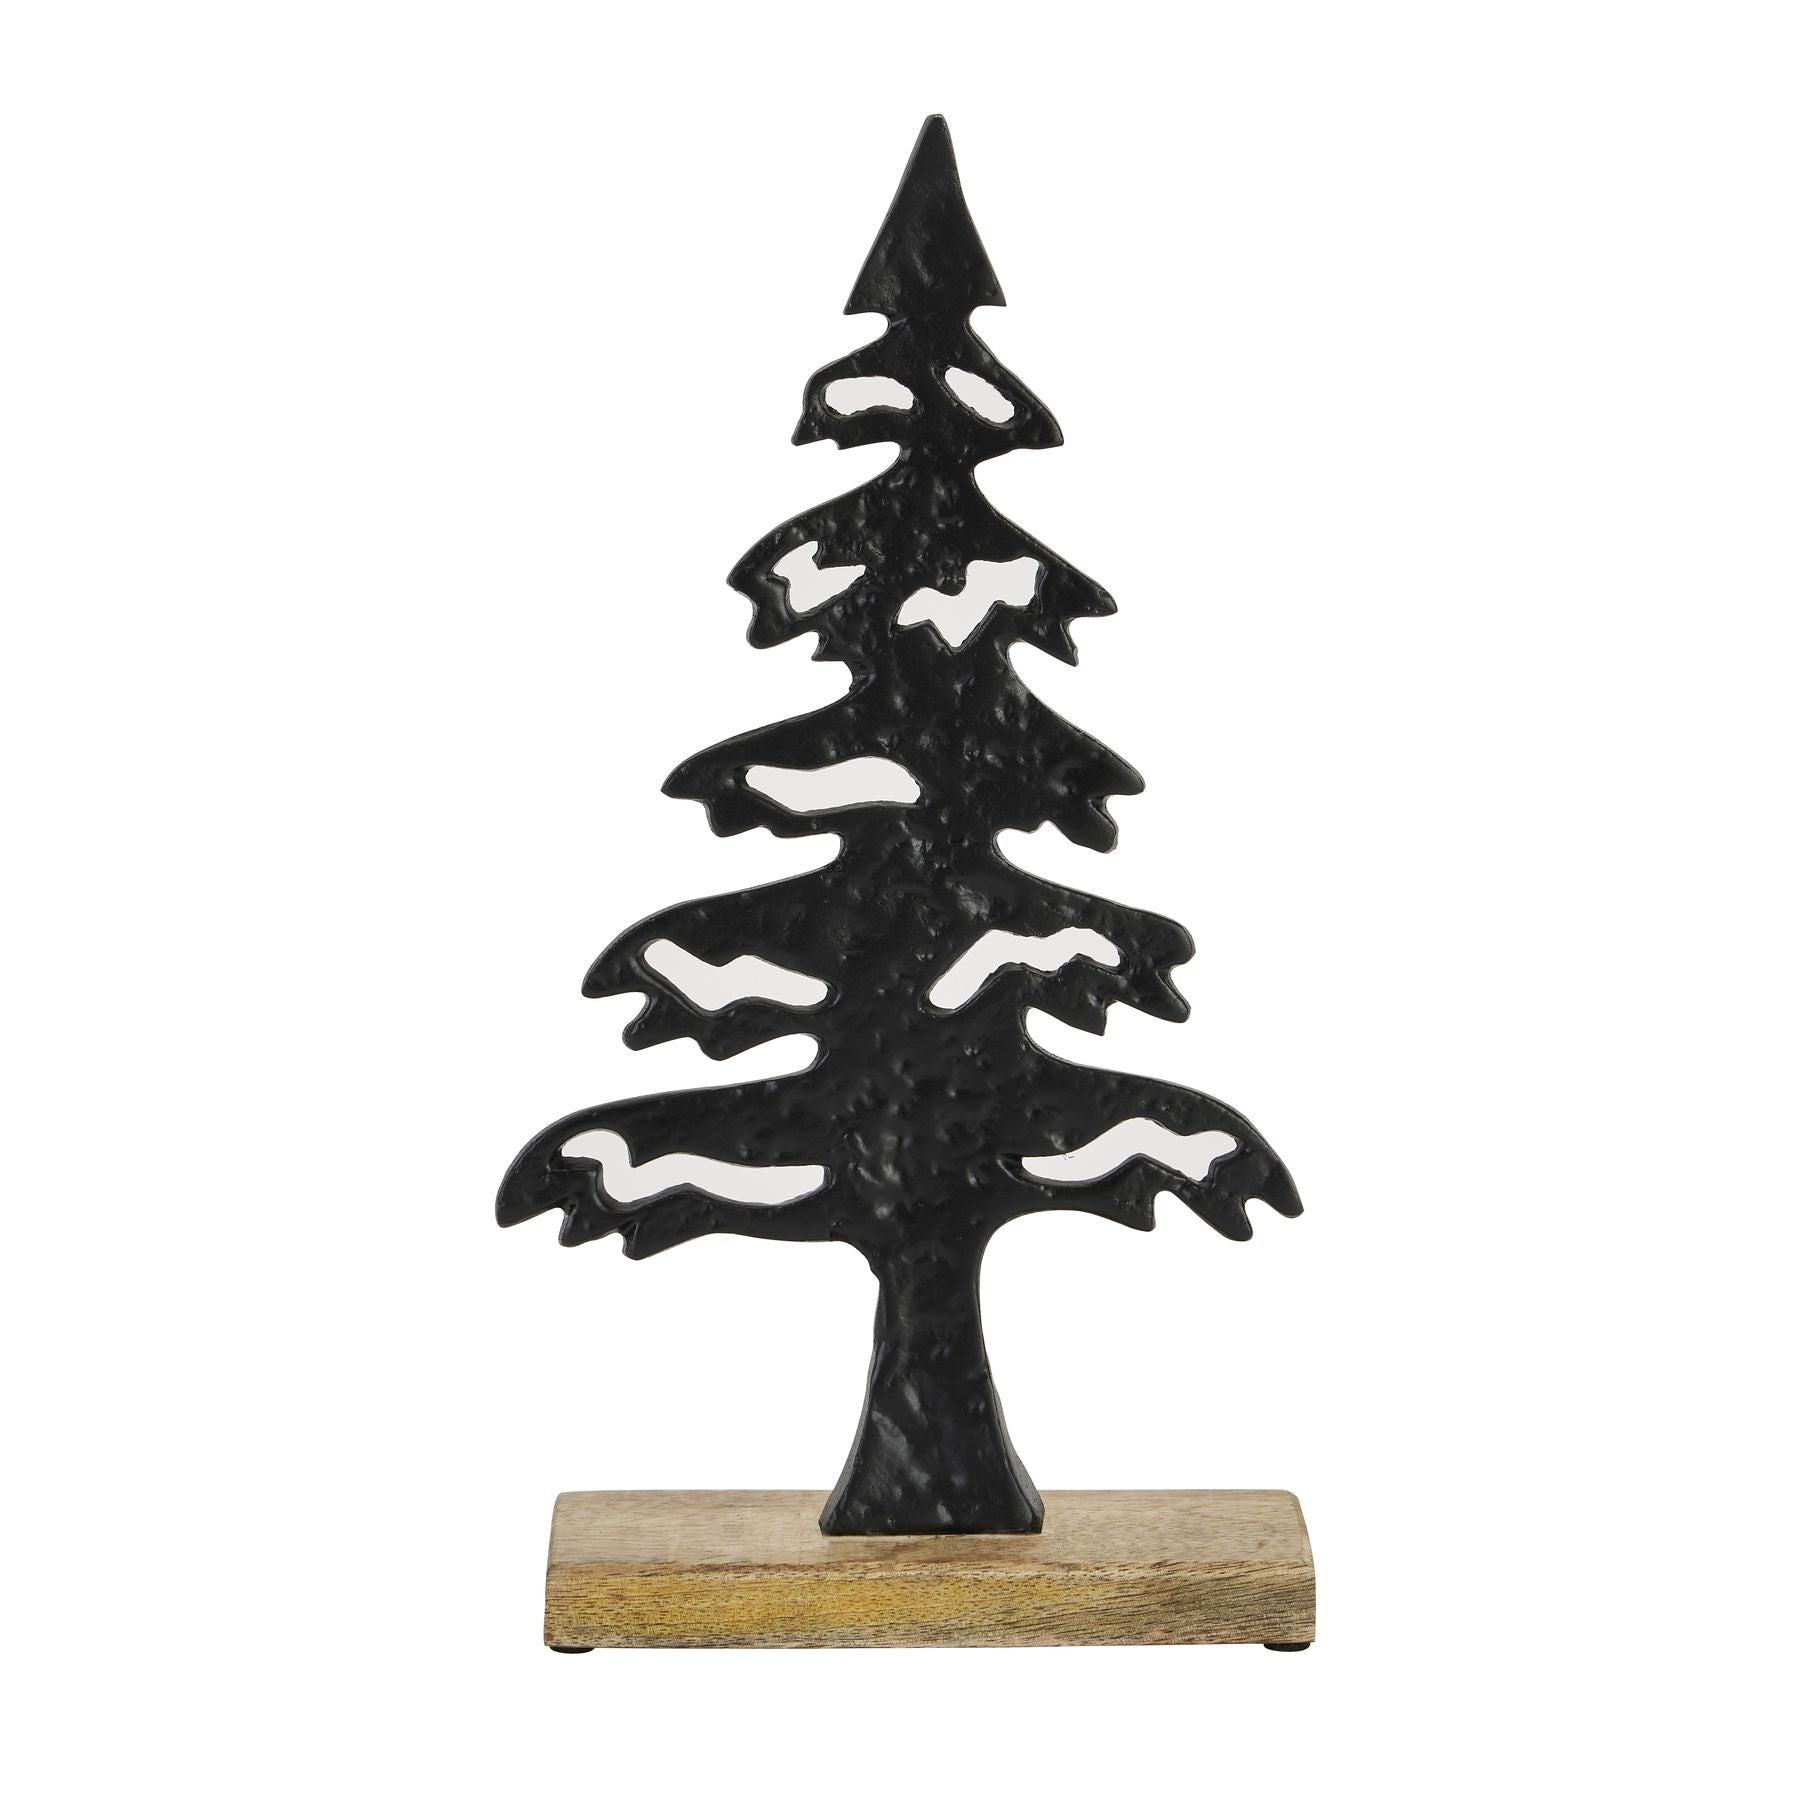 View The Noel Collection Cast Tree Black Ornament information